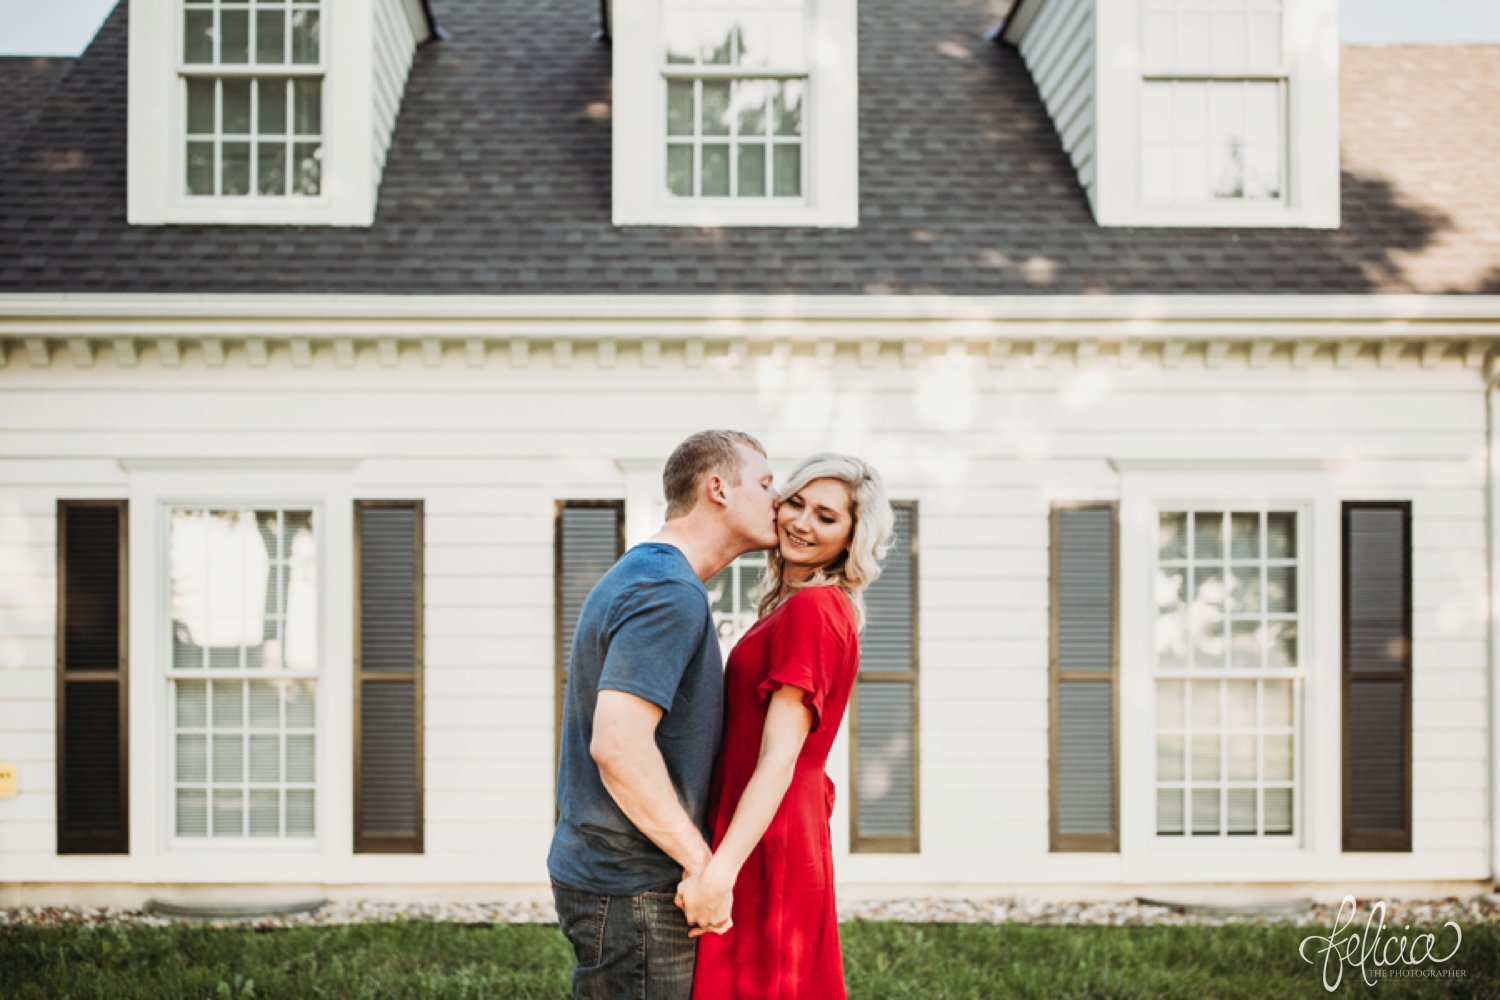 images by feliciathephotographer.com | destination wedding photographer | engagement | farmhouse | country | kansas city | sweet southern | red dress | nordstrom rack | unique halo diamond ring | casual | kiss | cowboy | 